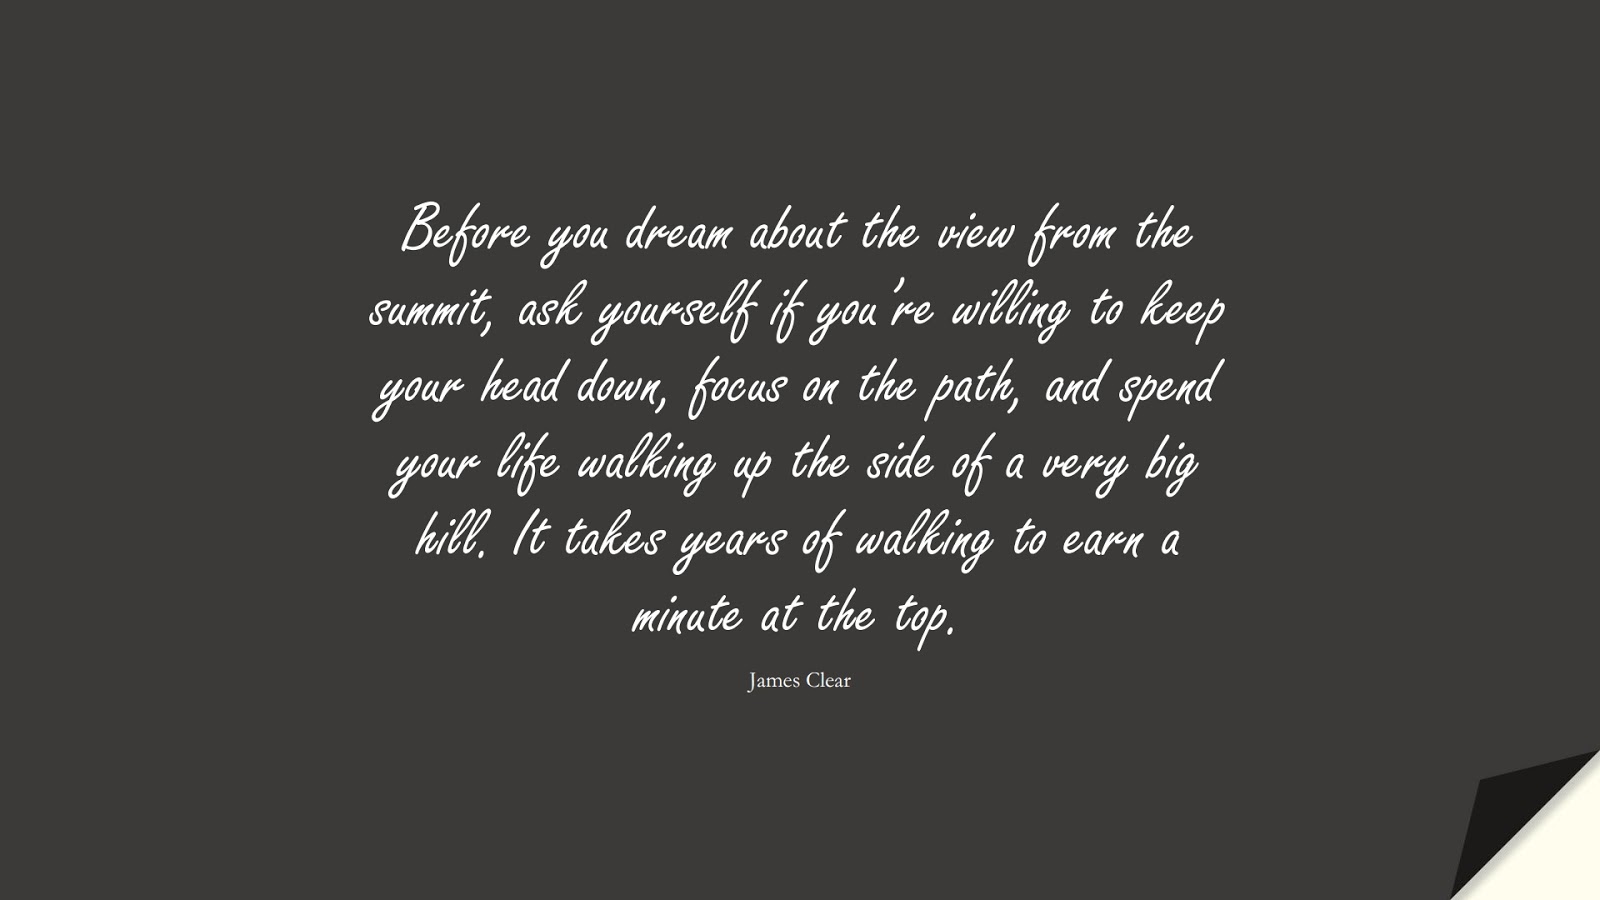 Before you dream about the view from the summit, ask yourself if you’re willing to keep your head down, focus on the path, and spend your life walking up the side of a very big hill. It takes years of walking to earn a minute at the top. (James Clear);  #NeverGiveUpQuotes